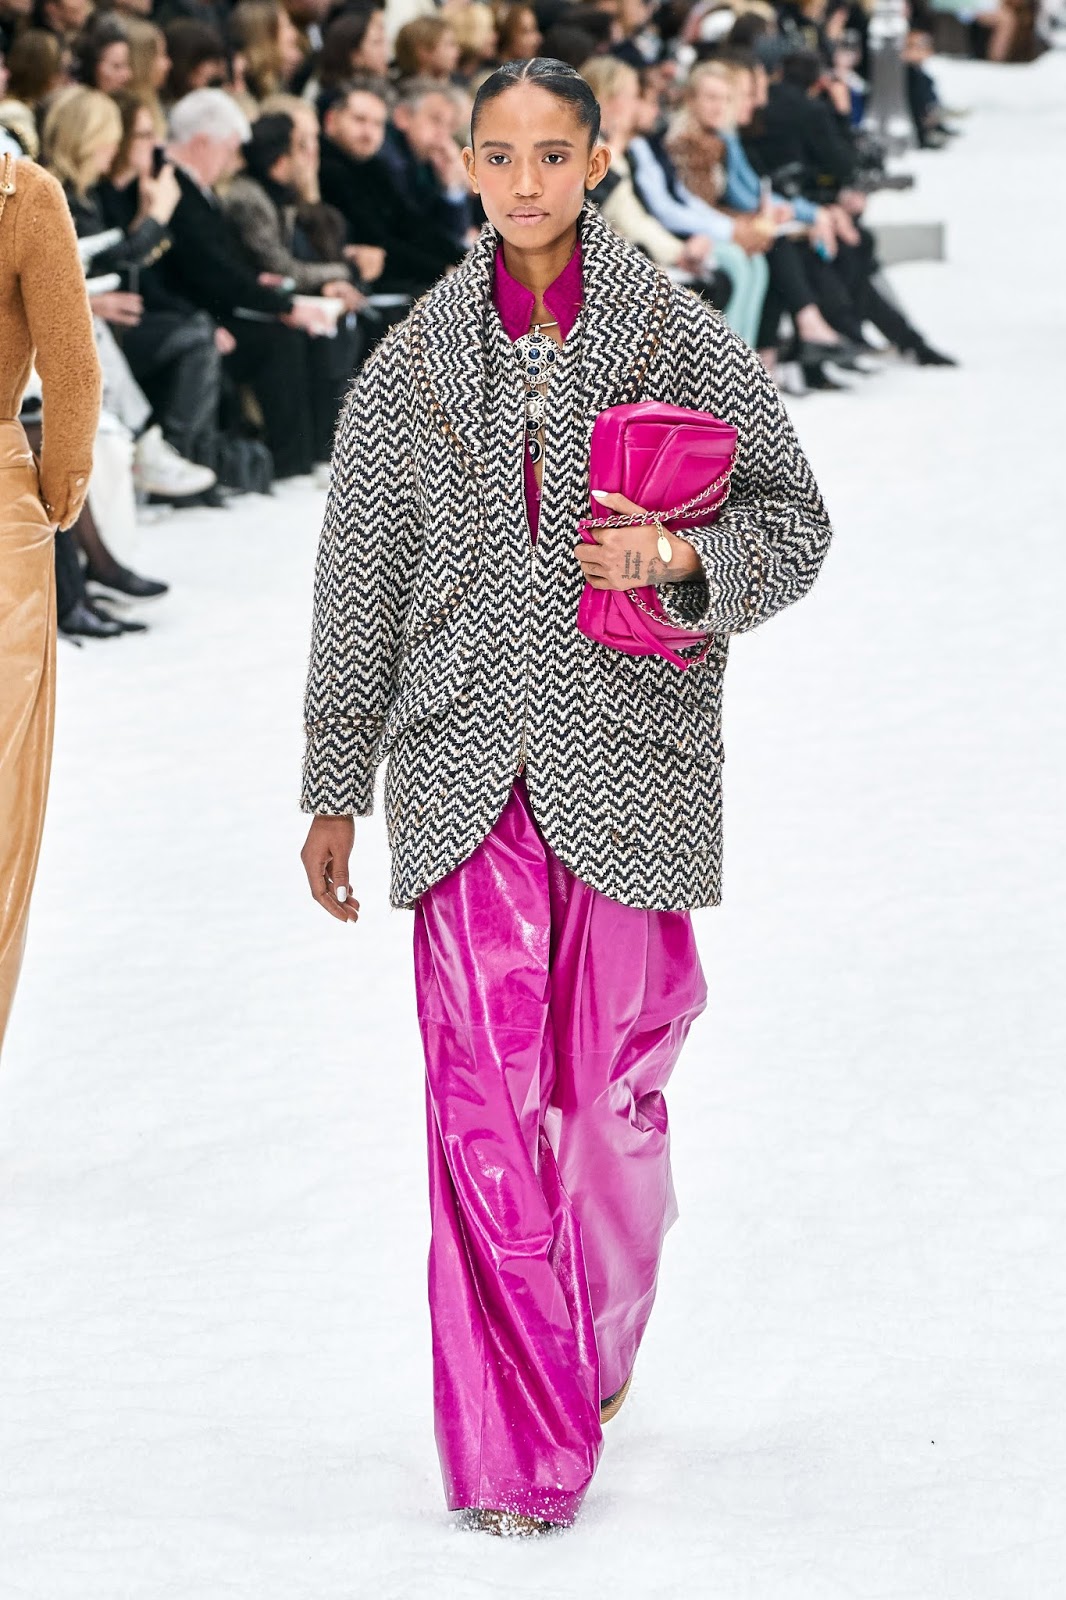 CHANEL: On the Bright Side March 22, 2019 | ZsaZsa Bellagio - Like No Other